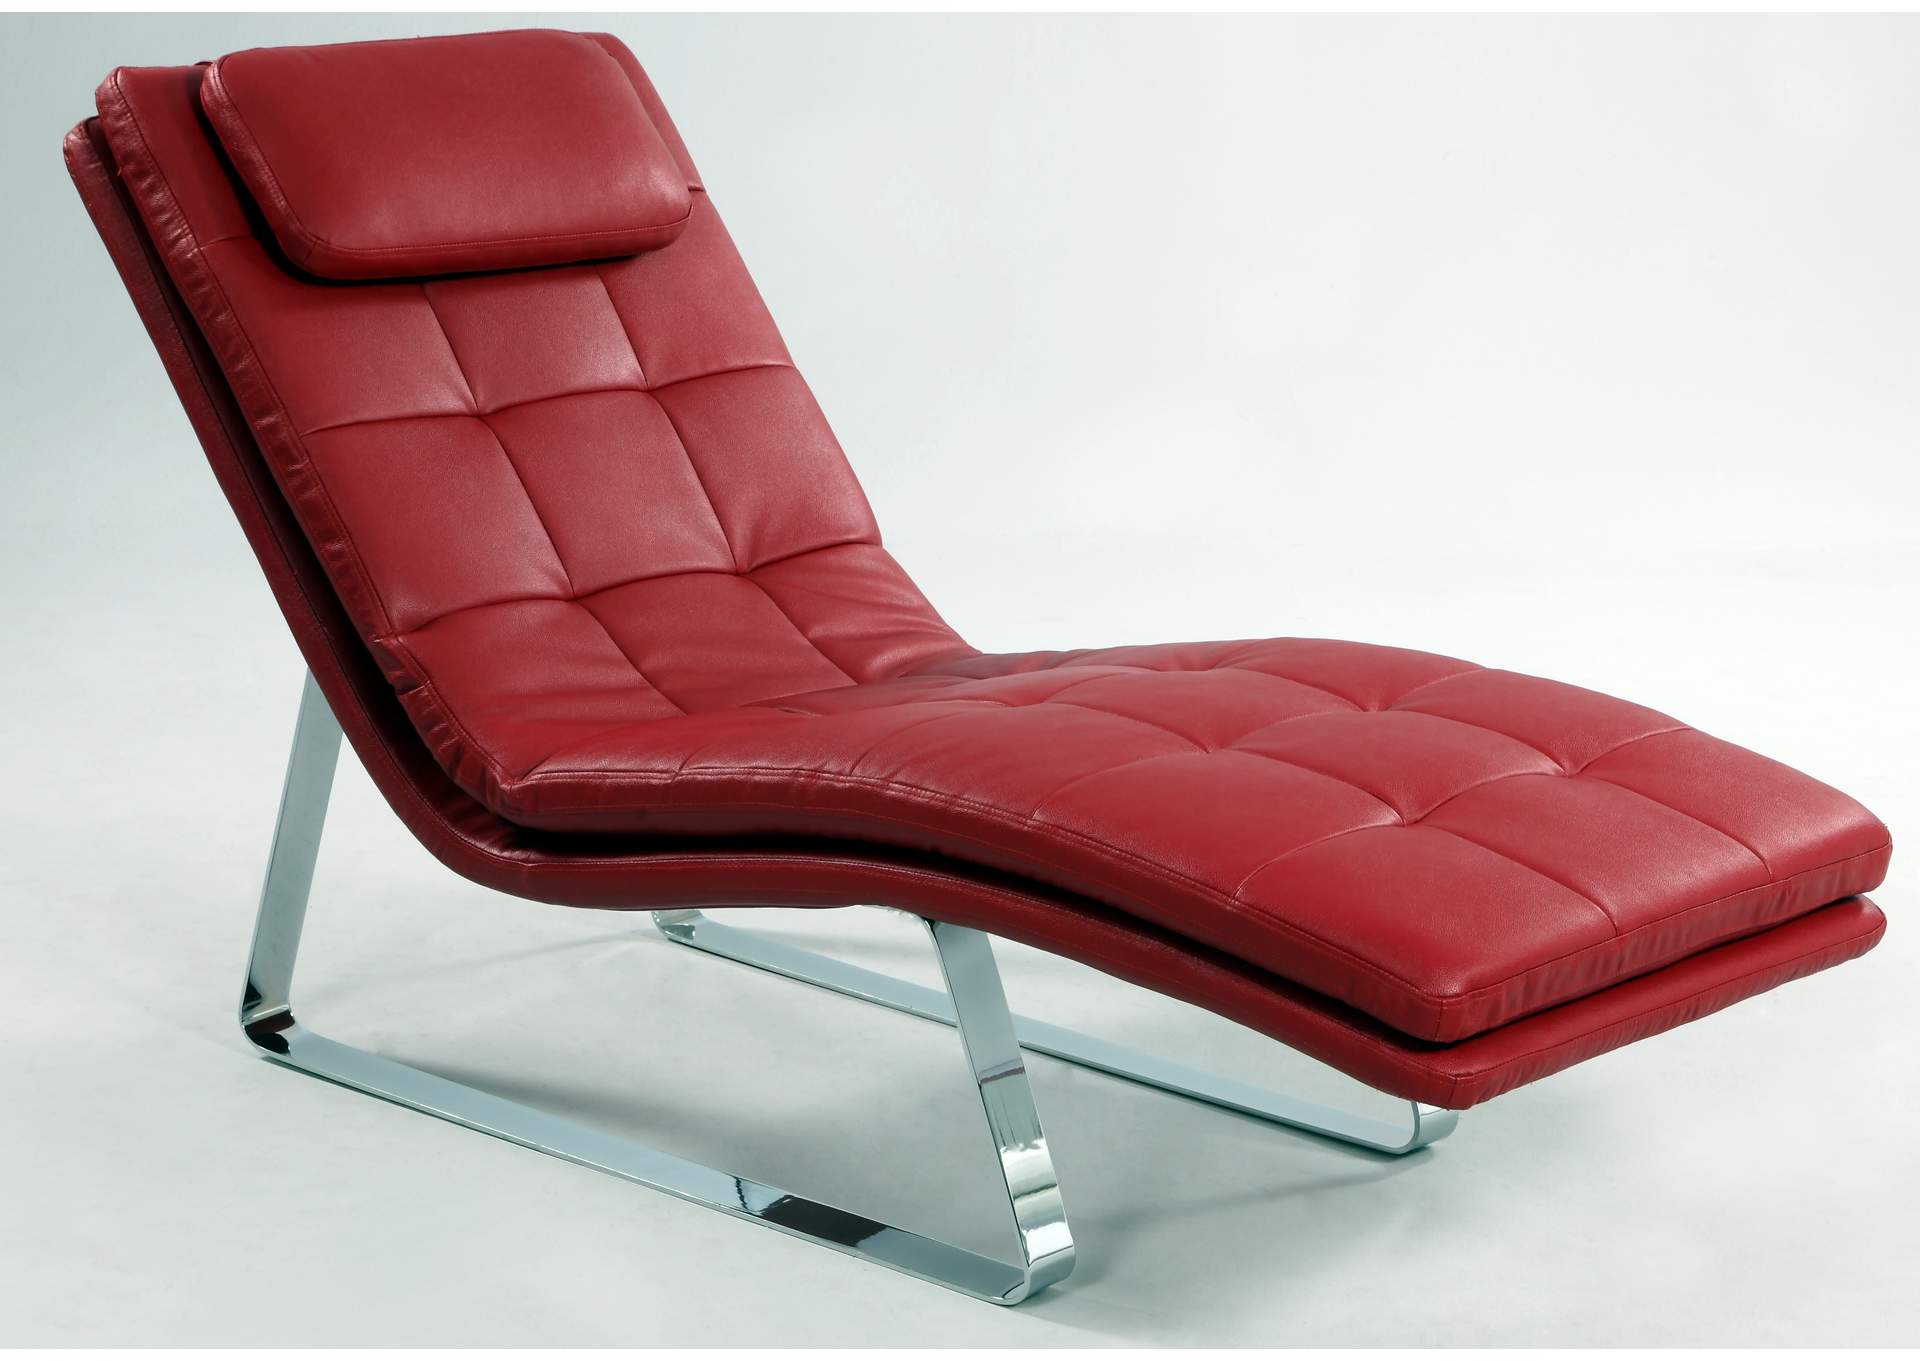 Contemporary  Lounge Chair  w/ Chrome Legs,Chintaly Imports